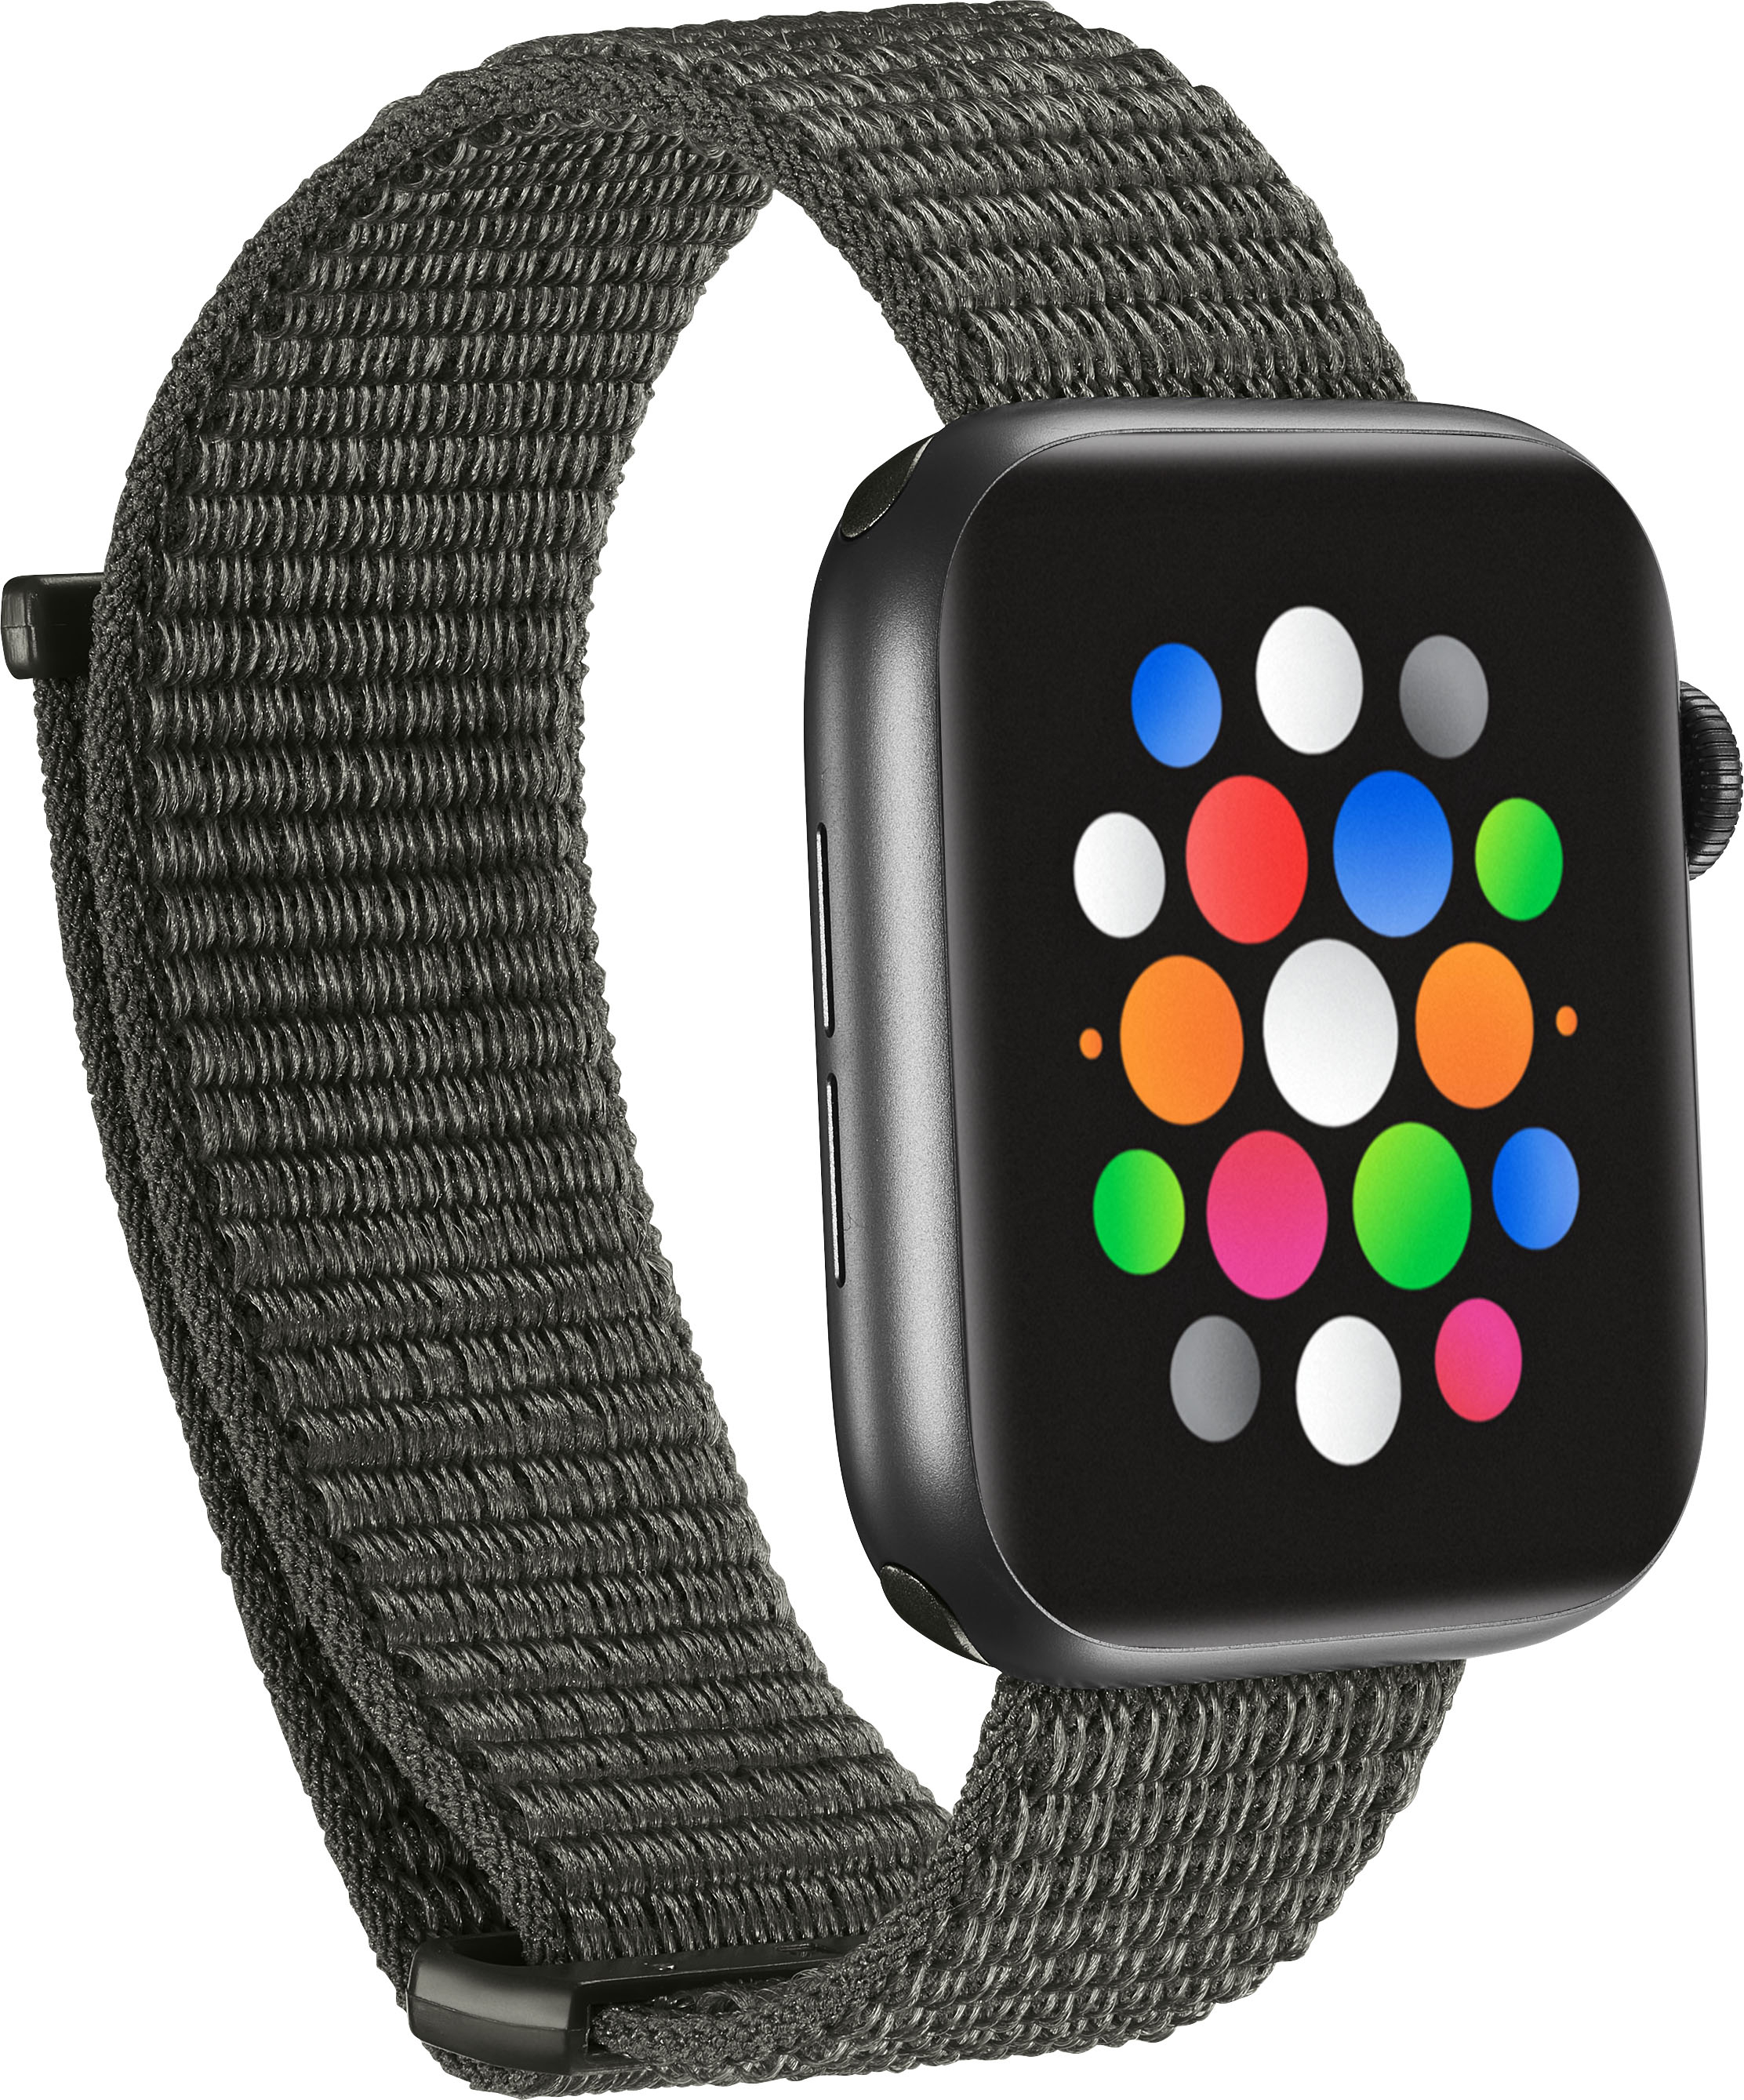 New Apple Watch Ultra bands work with other Apple Watch models